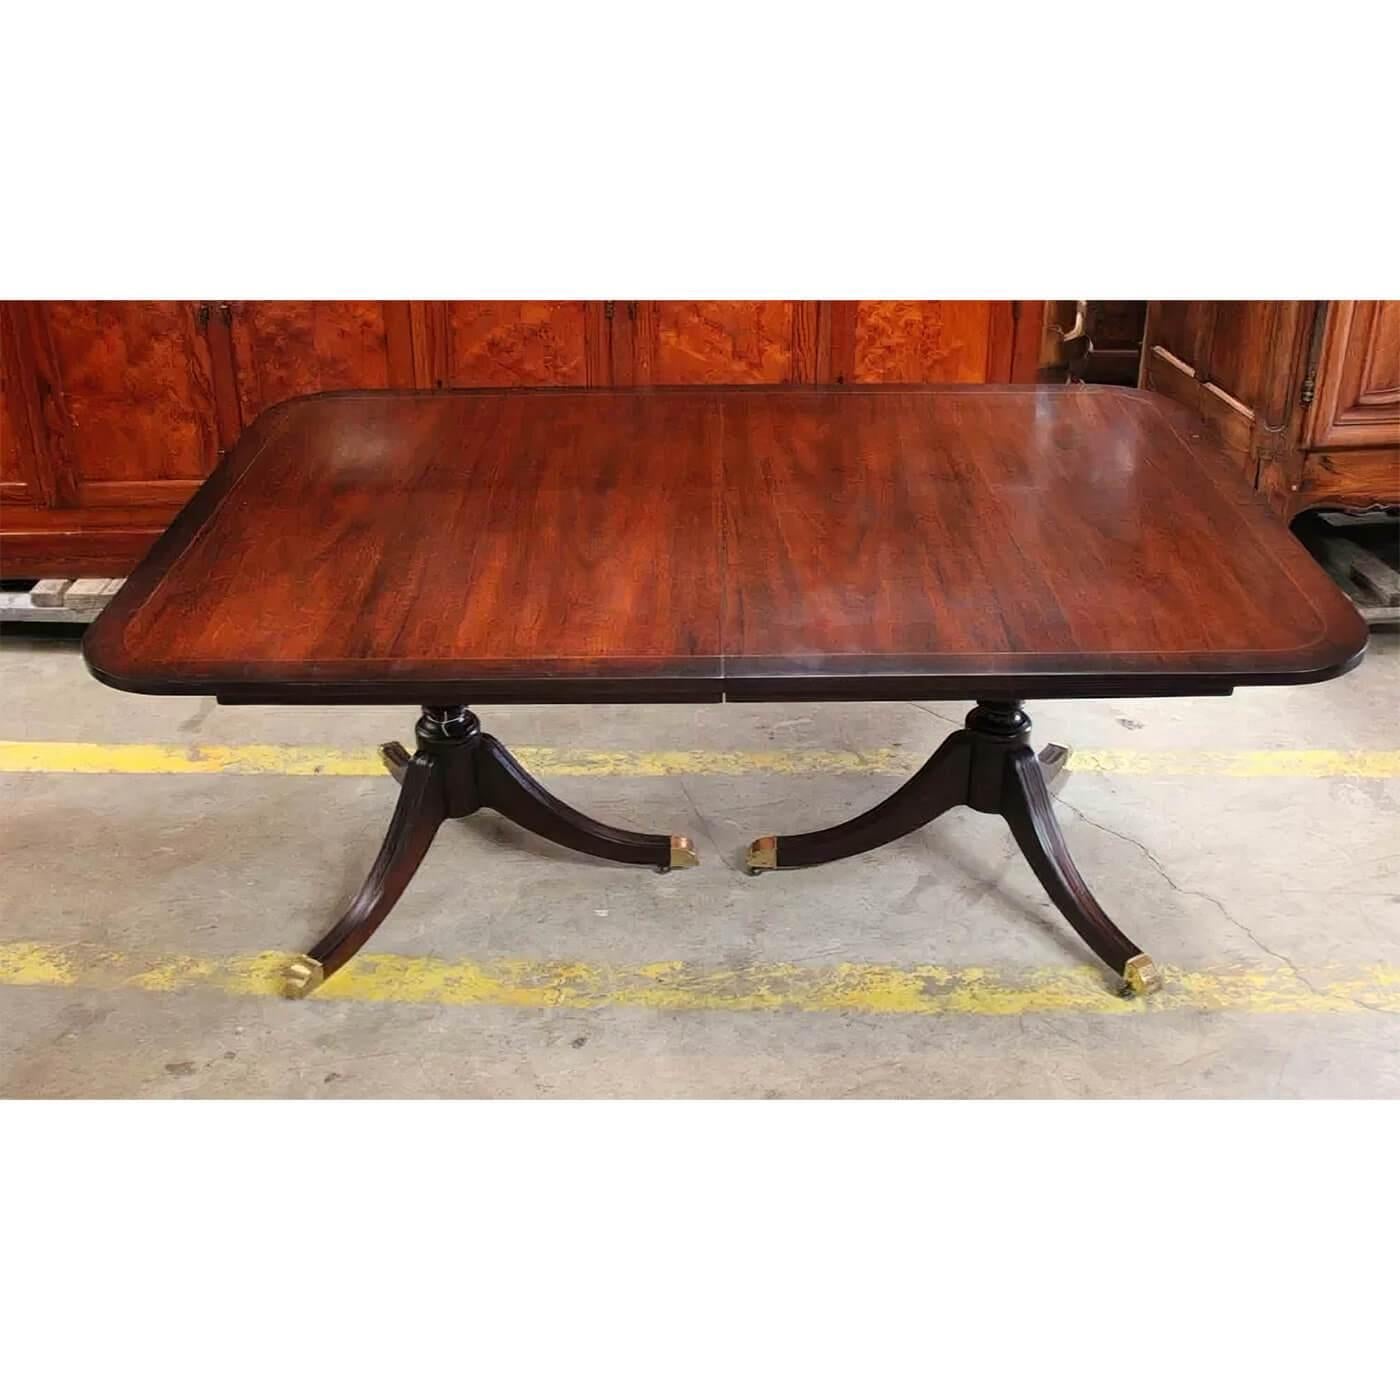 An English Regency style mahogany double pedestal extending dining table with a cross banded and line inlaid edge, four 12 inch leaves stored inside the table and raised on two-column pillar three-leg pedestals raised on brass castors. By Kindel,